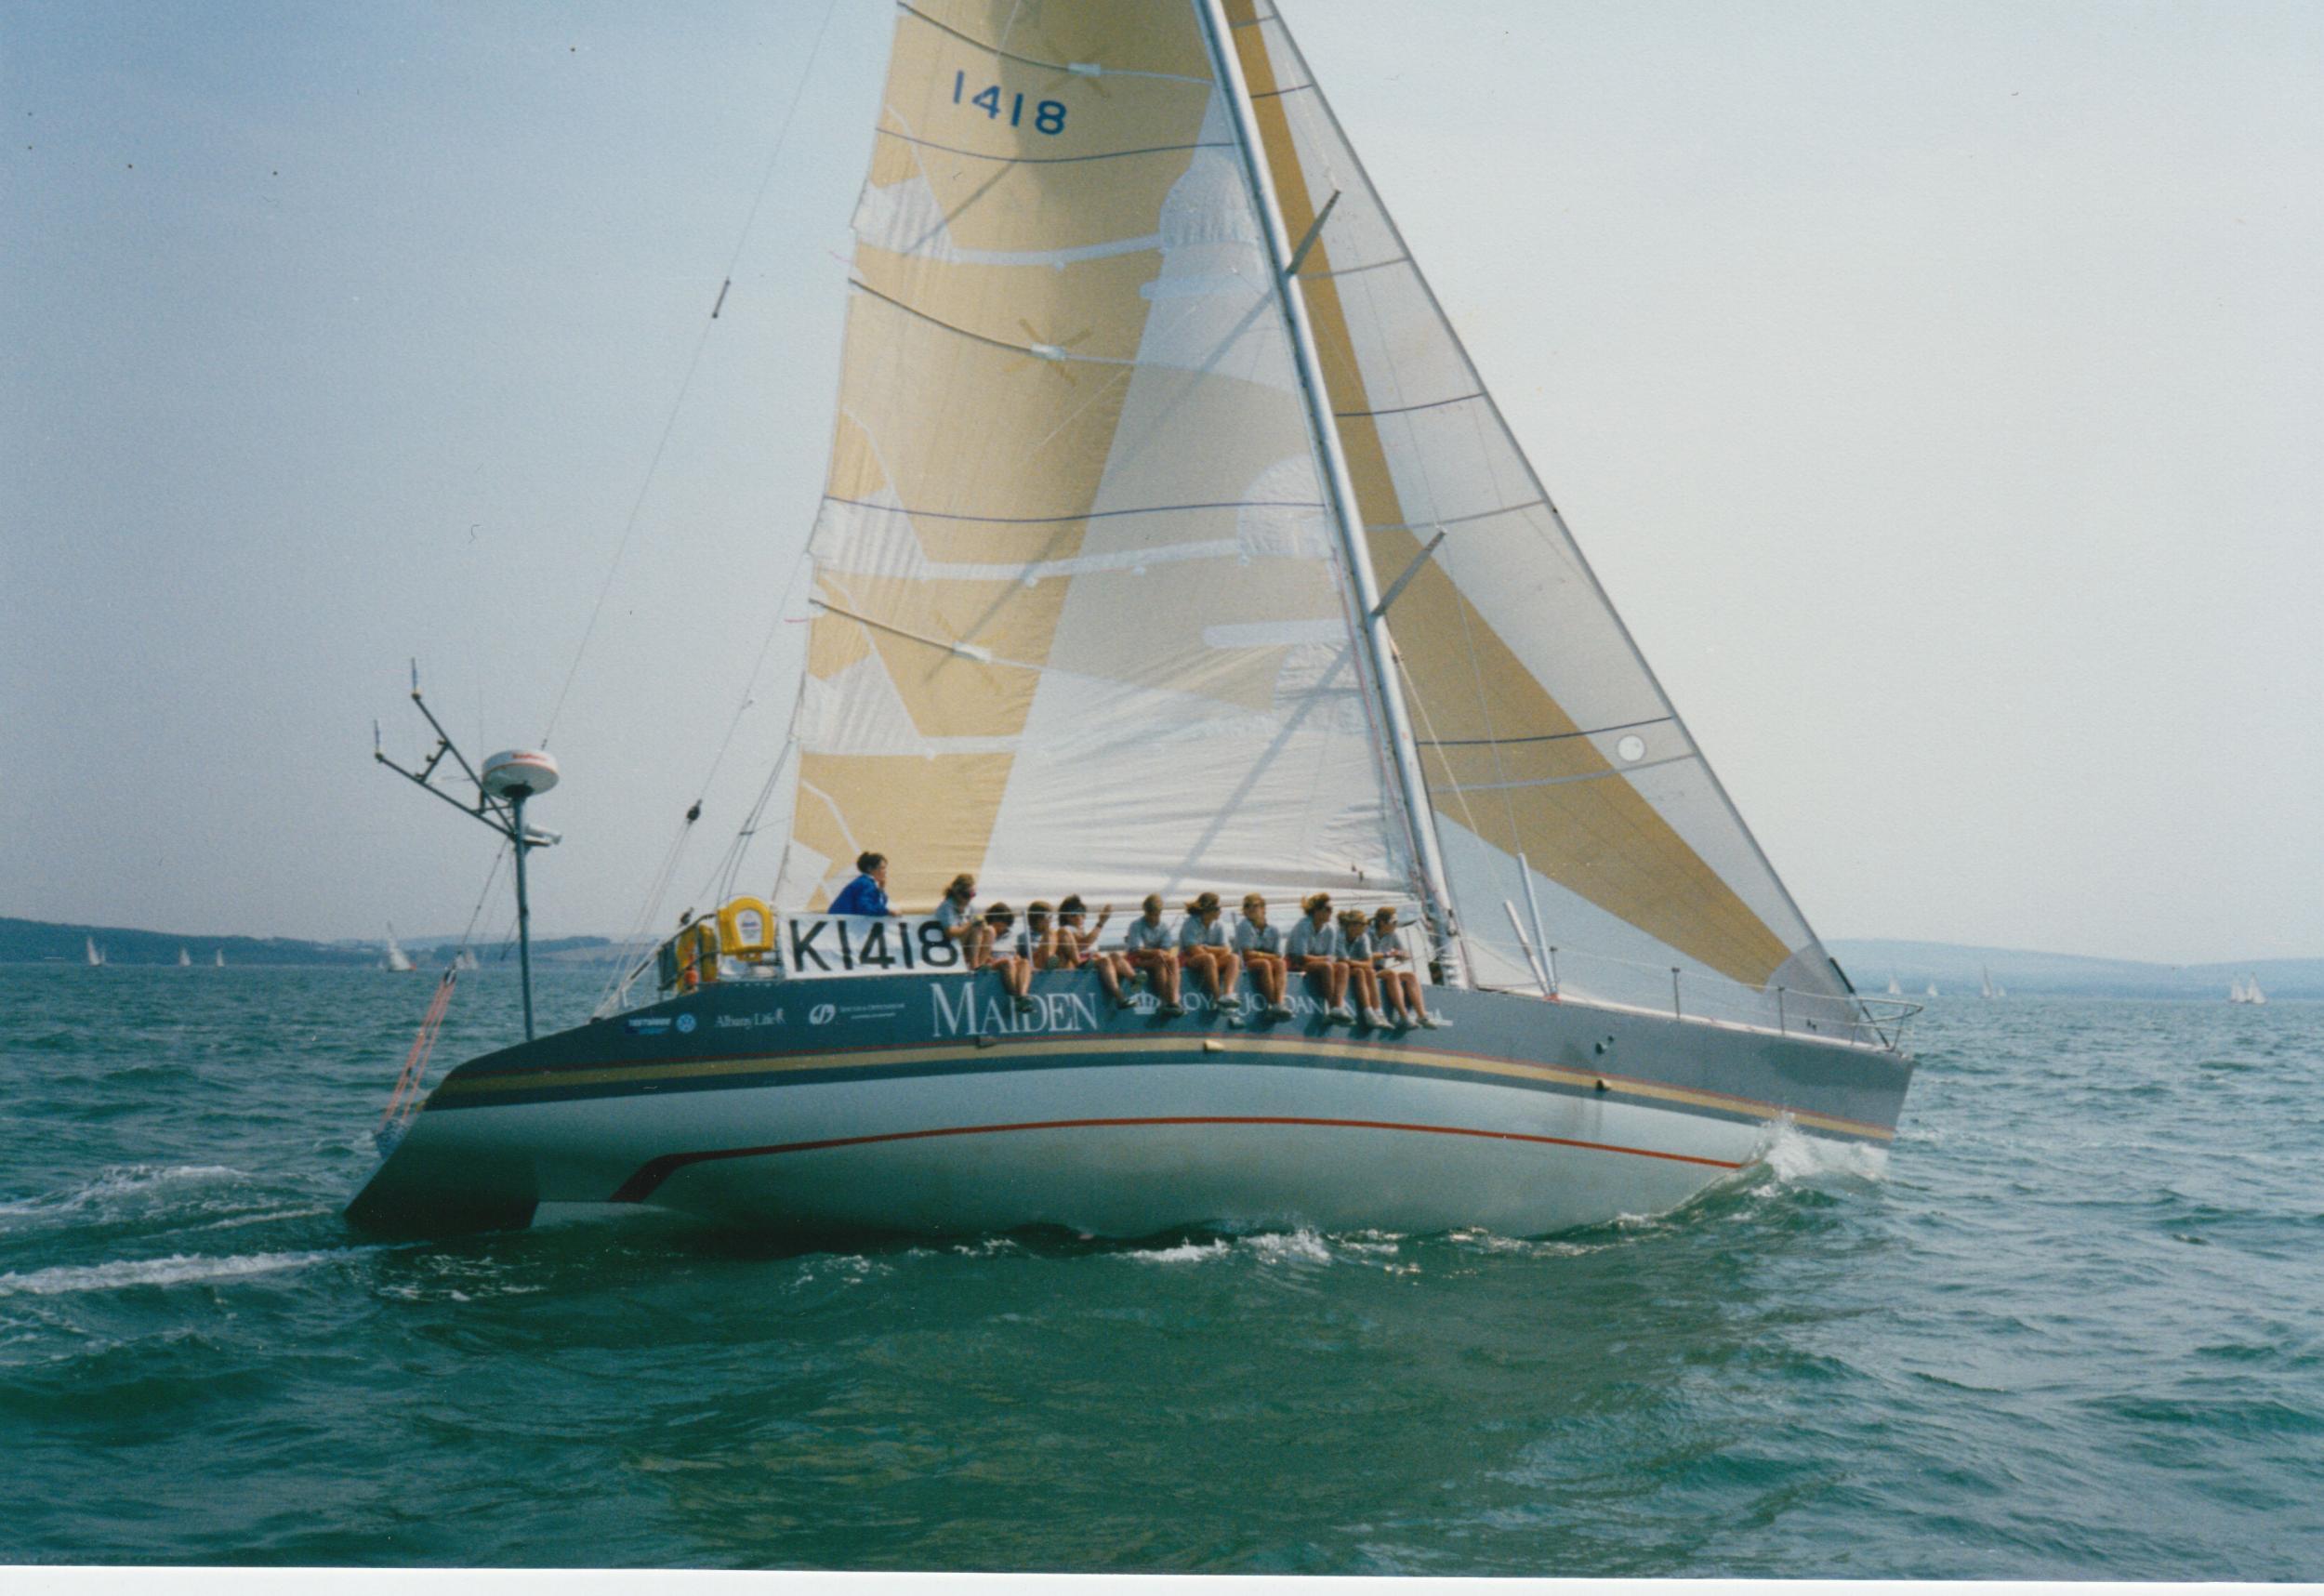 The ‘Maiden’ crew chartered 32,000 nautical miles in the race